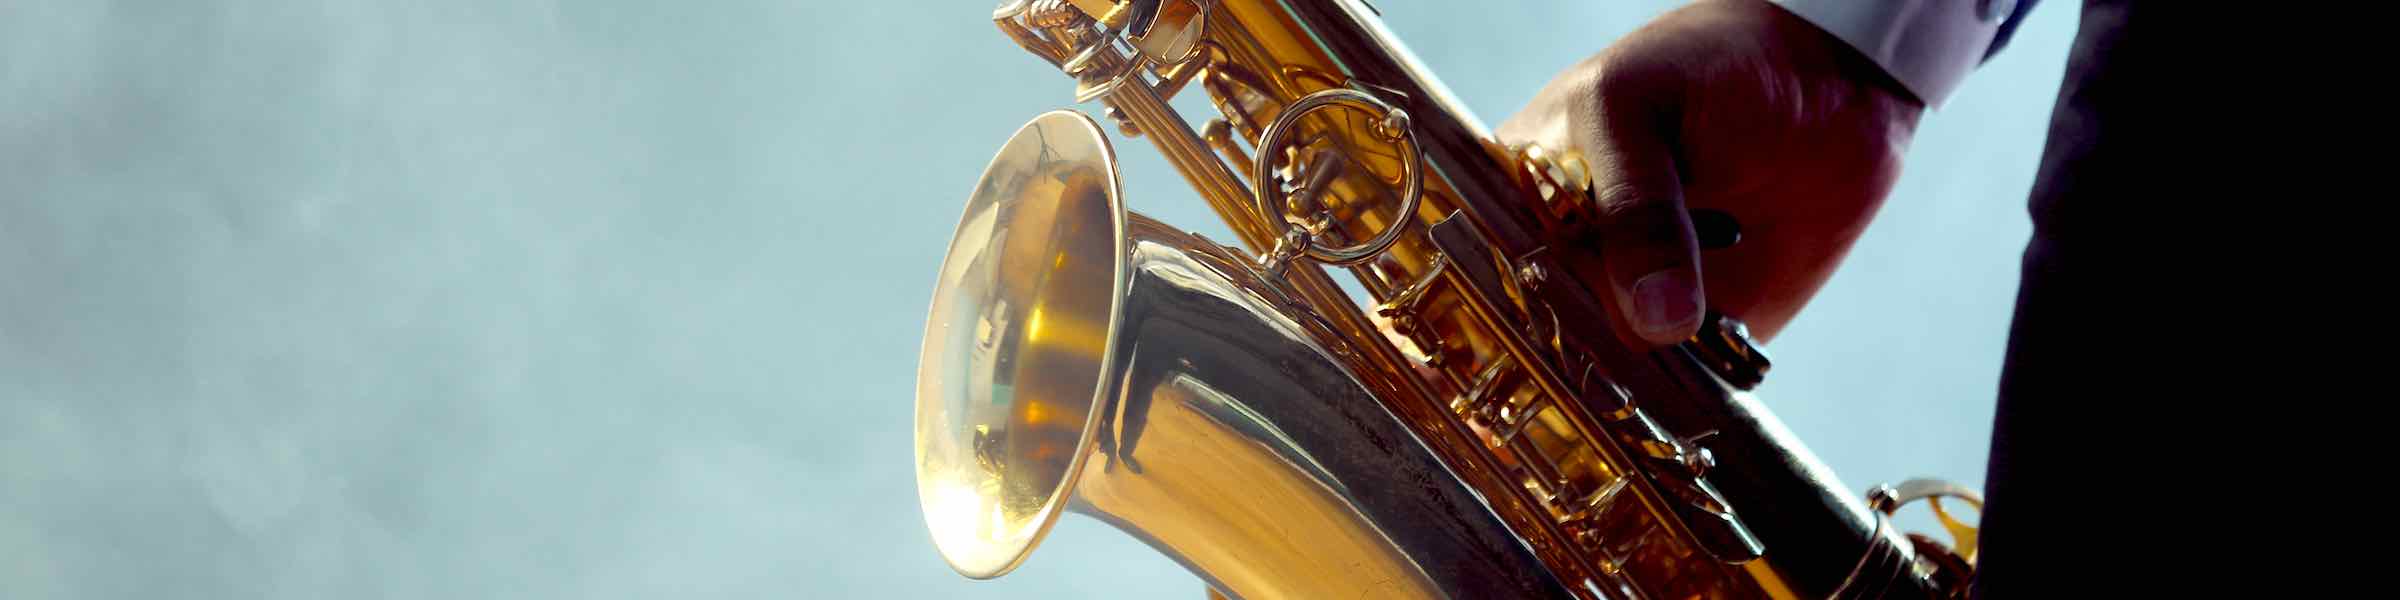 Close up view of a man playing a saxophone, with an abstract background.